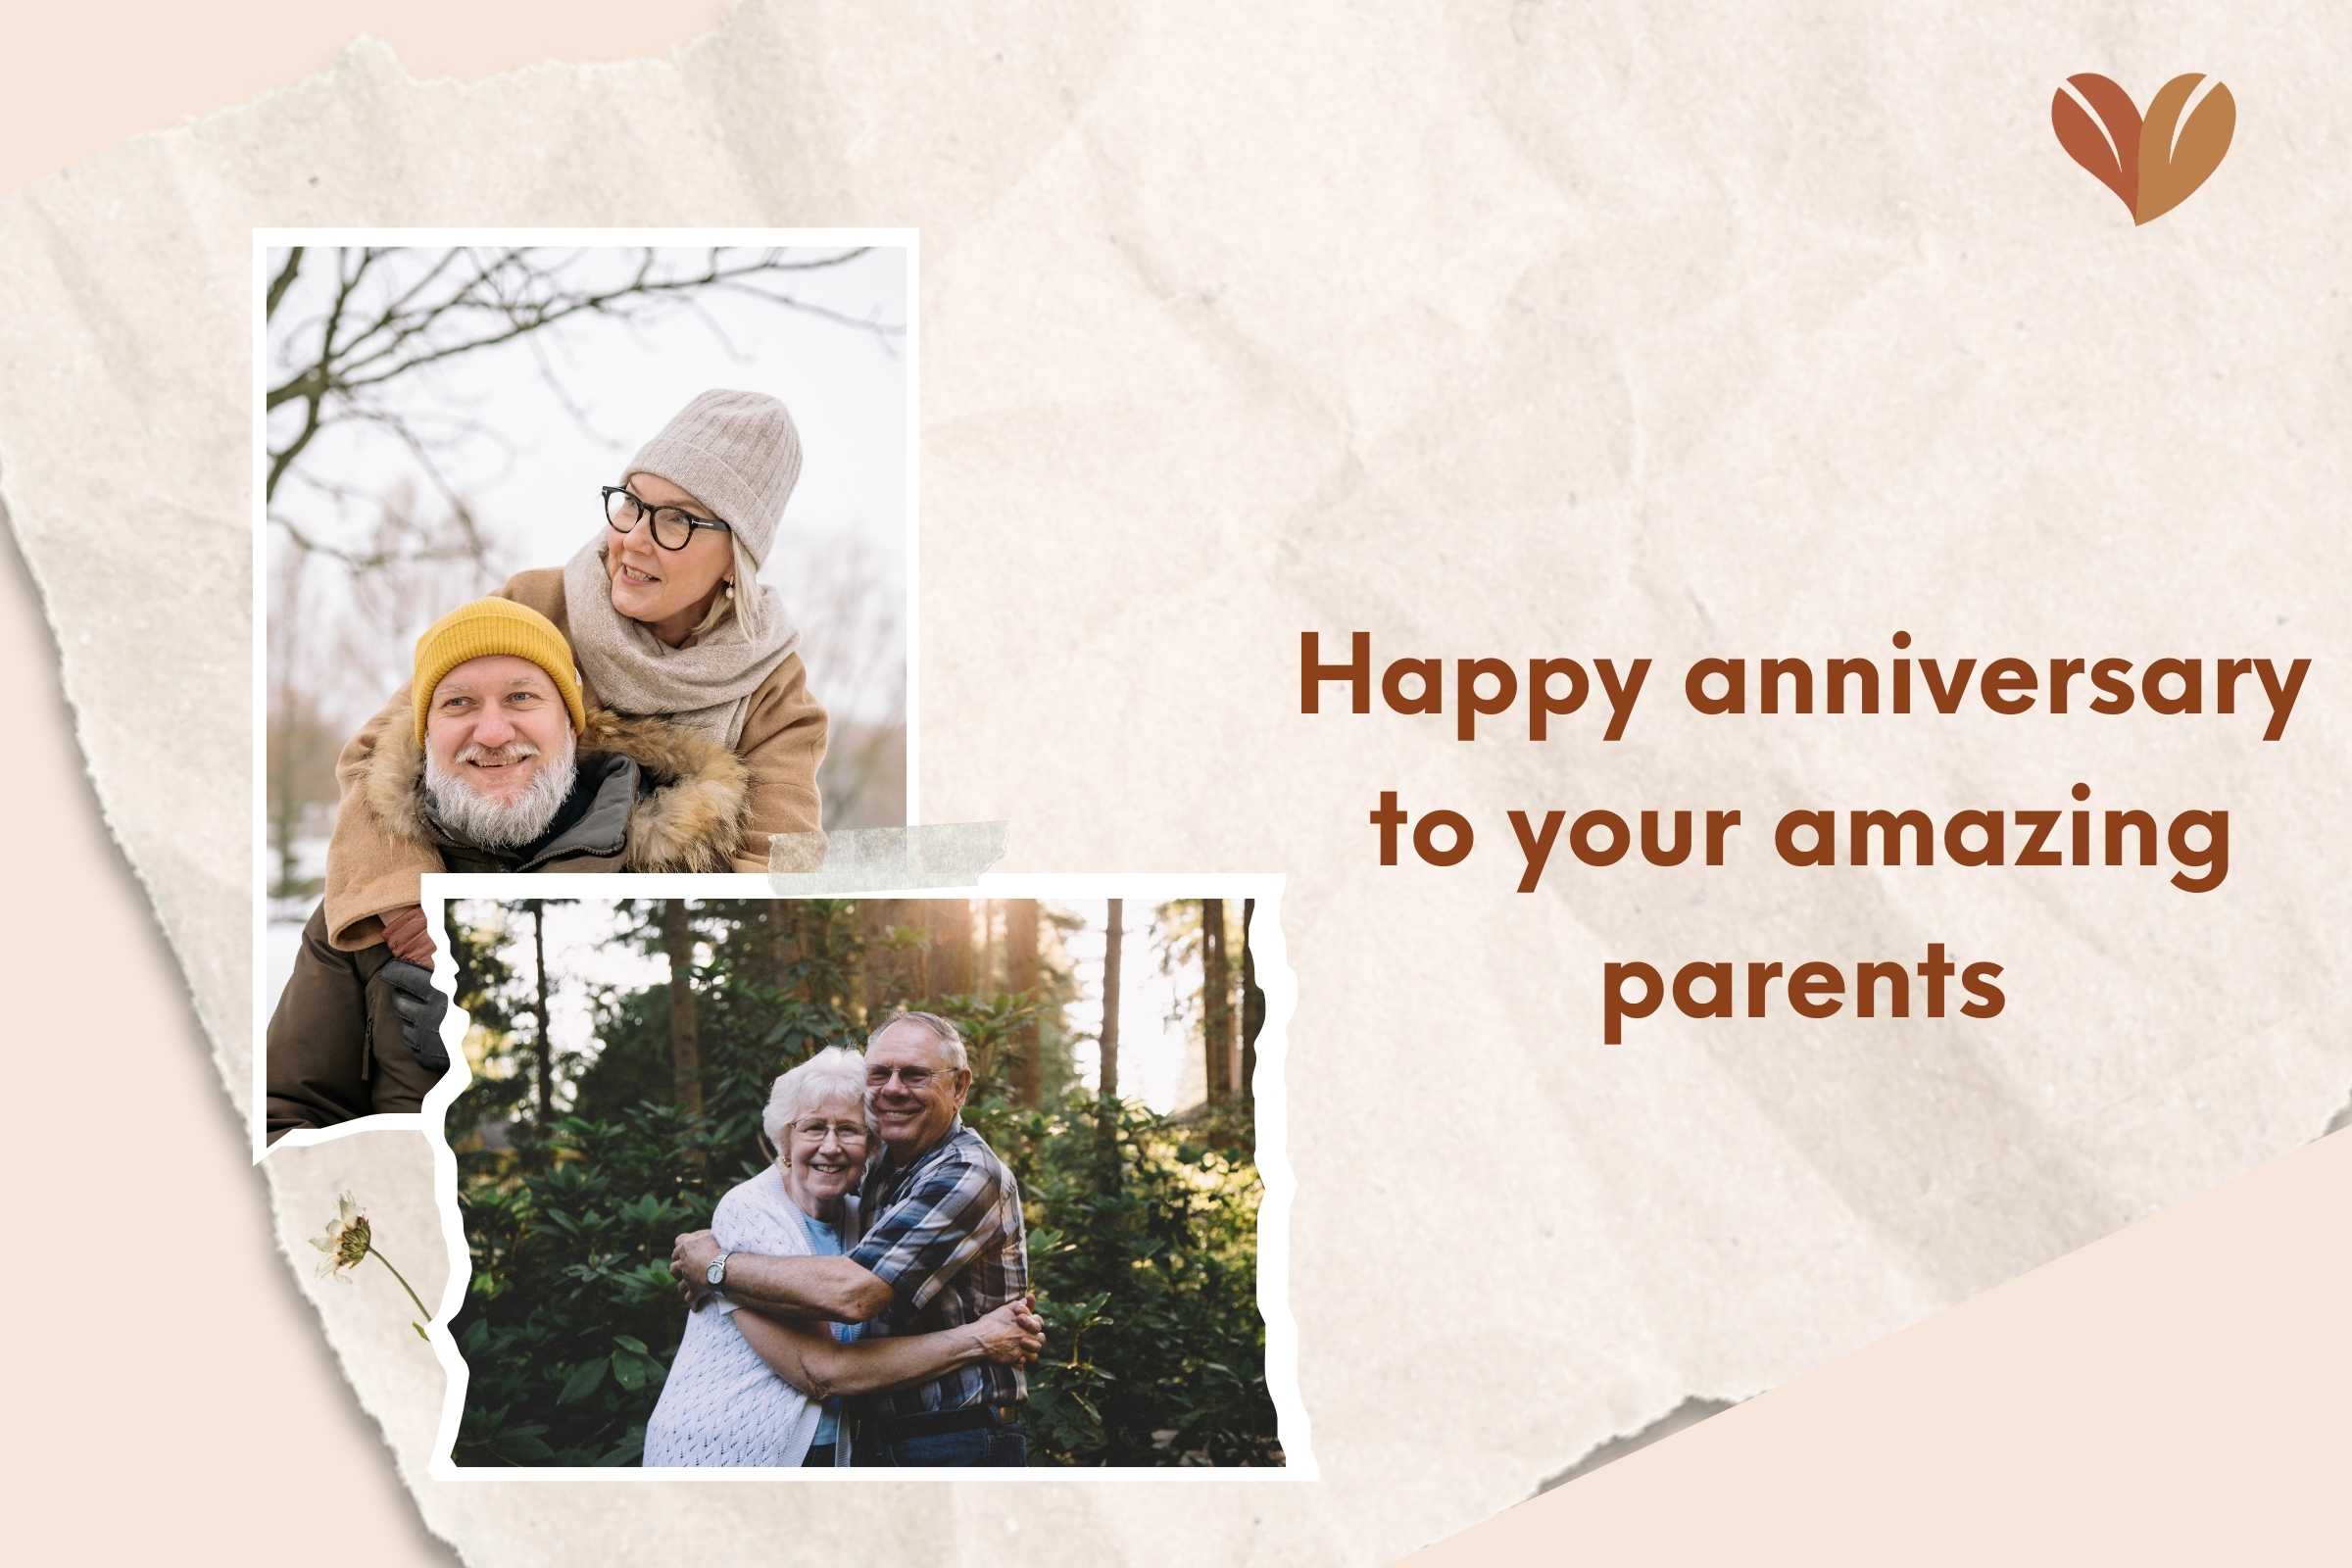 A picture that speaks a thousand words of love anniversary quotes for parents.